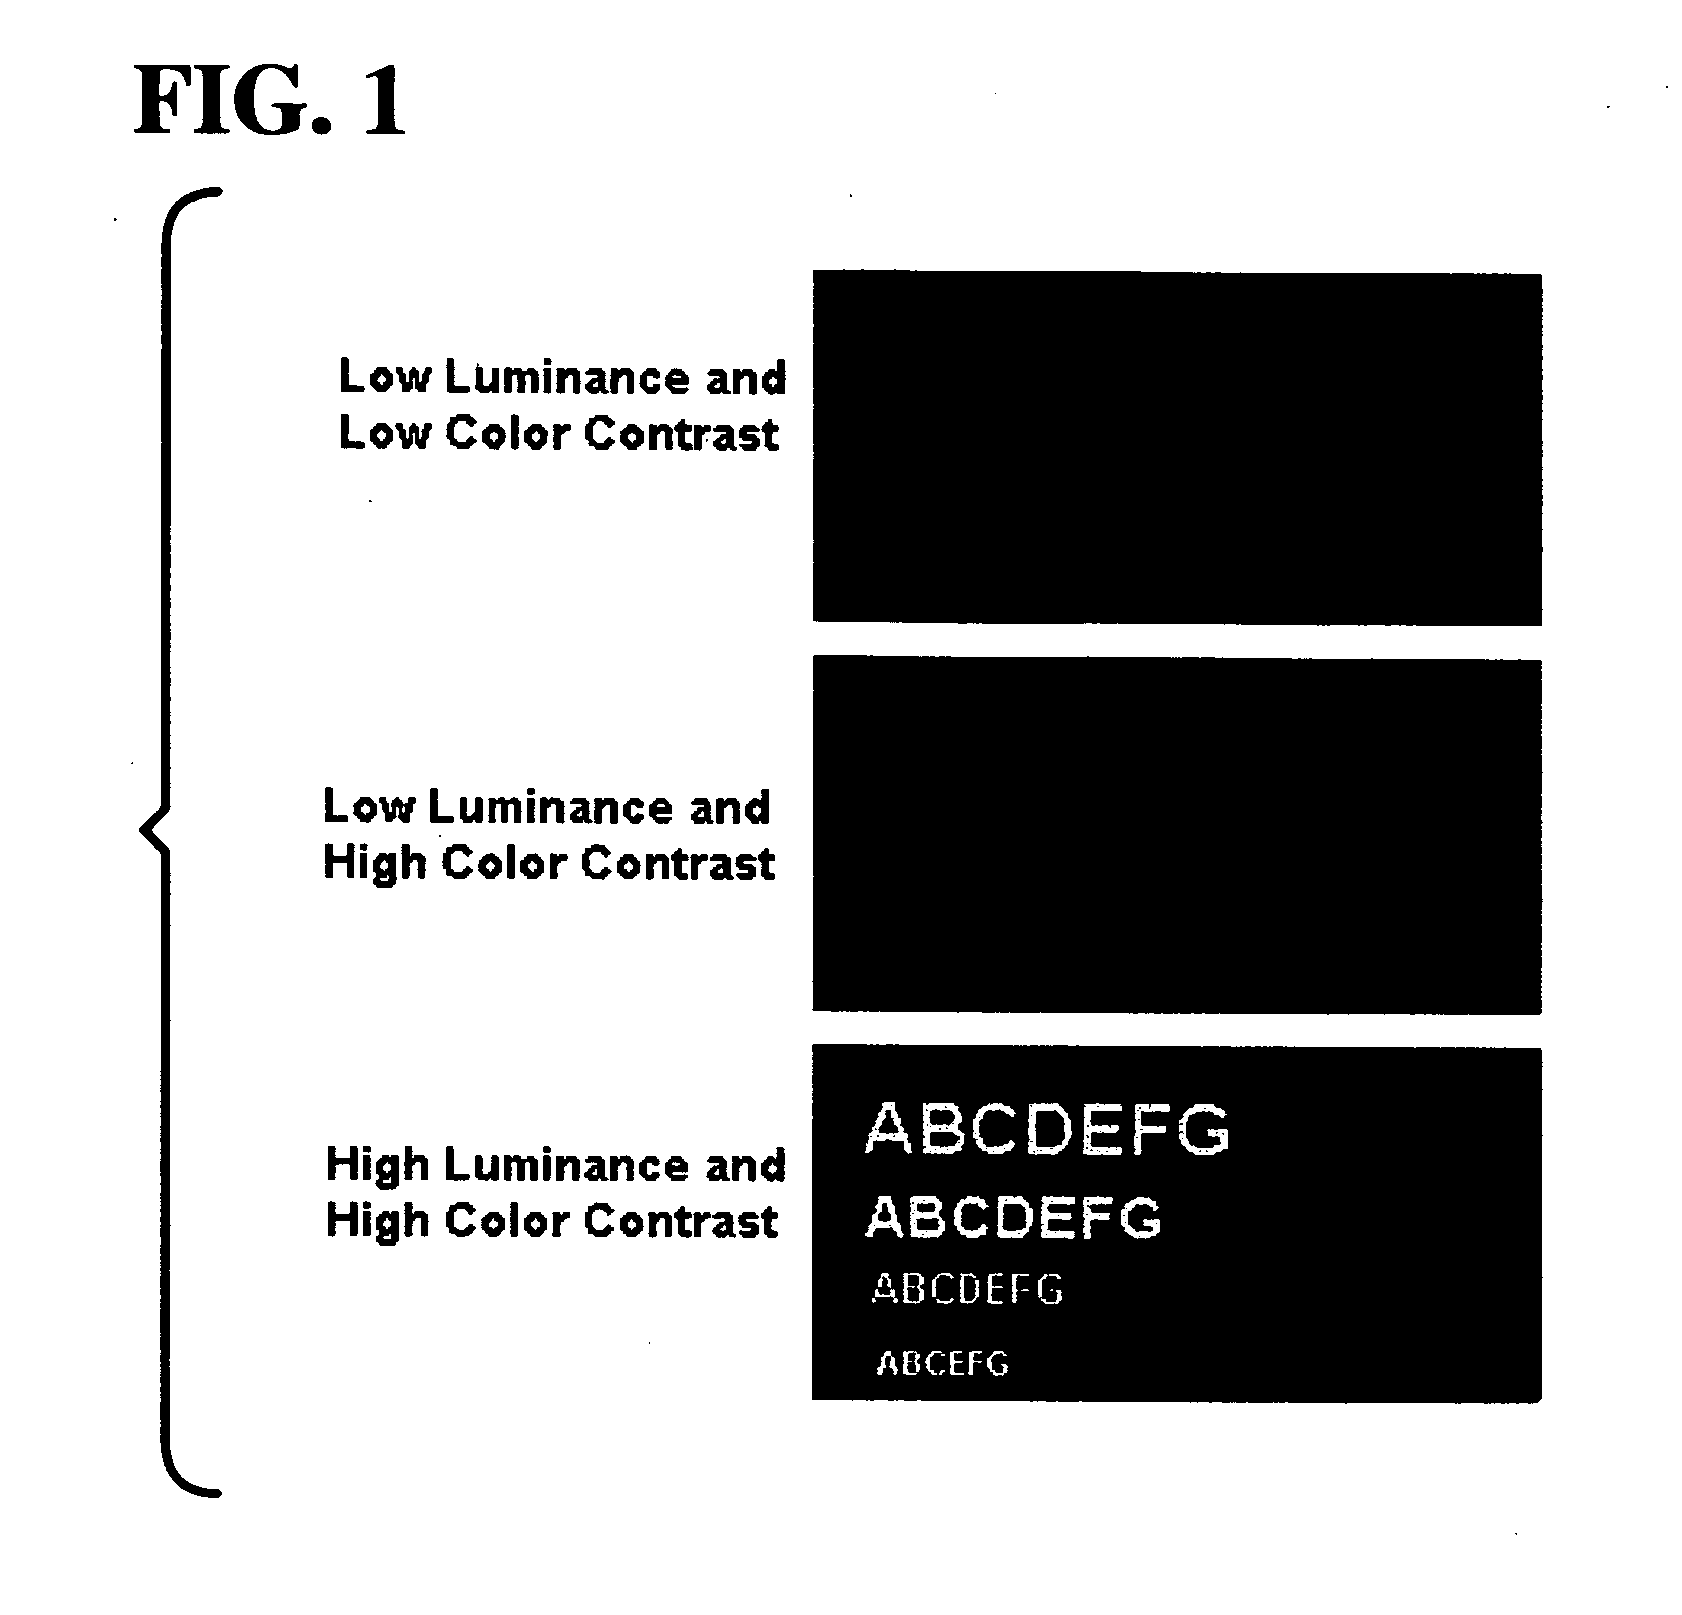 Methods for selecting high visual contrast colors in user-interface design